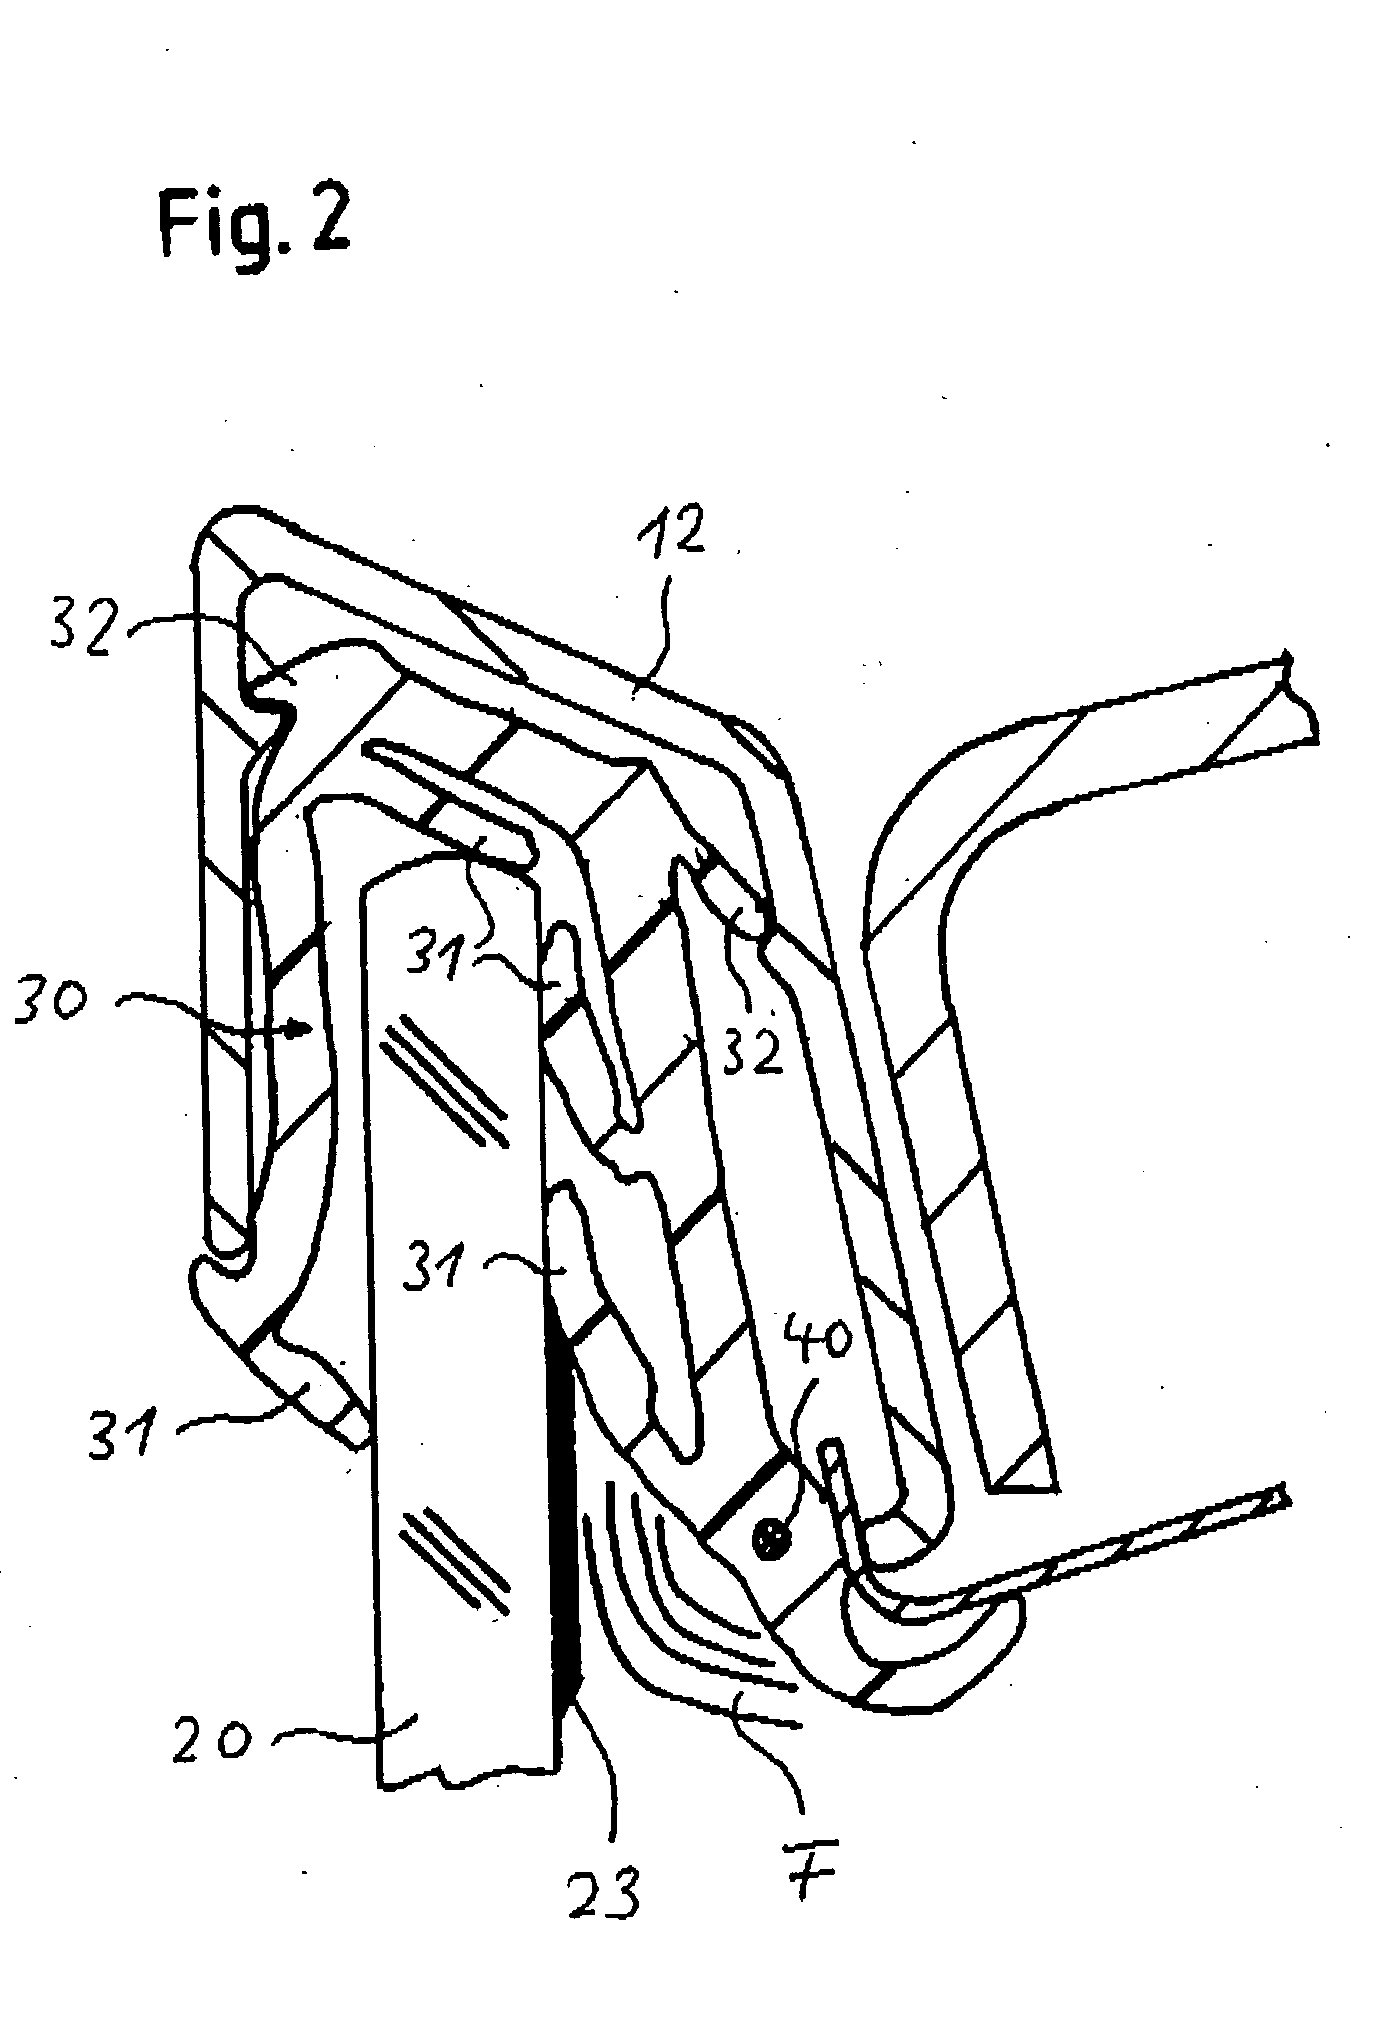 Apparatus for controlling and sensing moisture on a movable closure member, more particularly an electrically powered automotive window pane